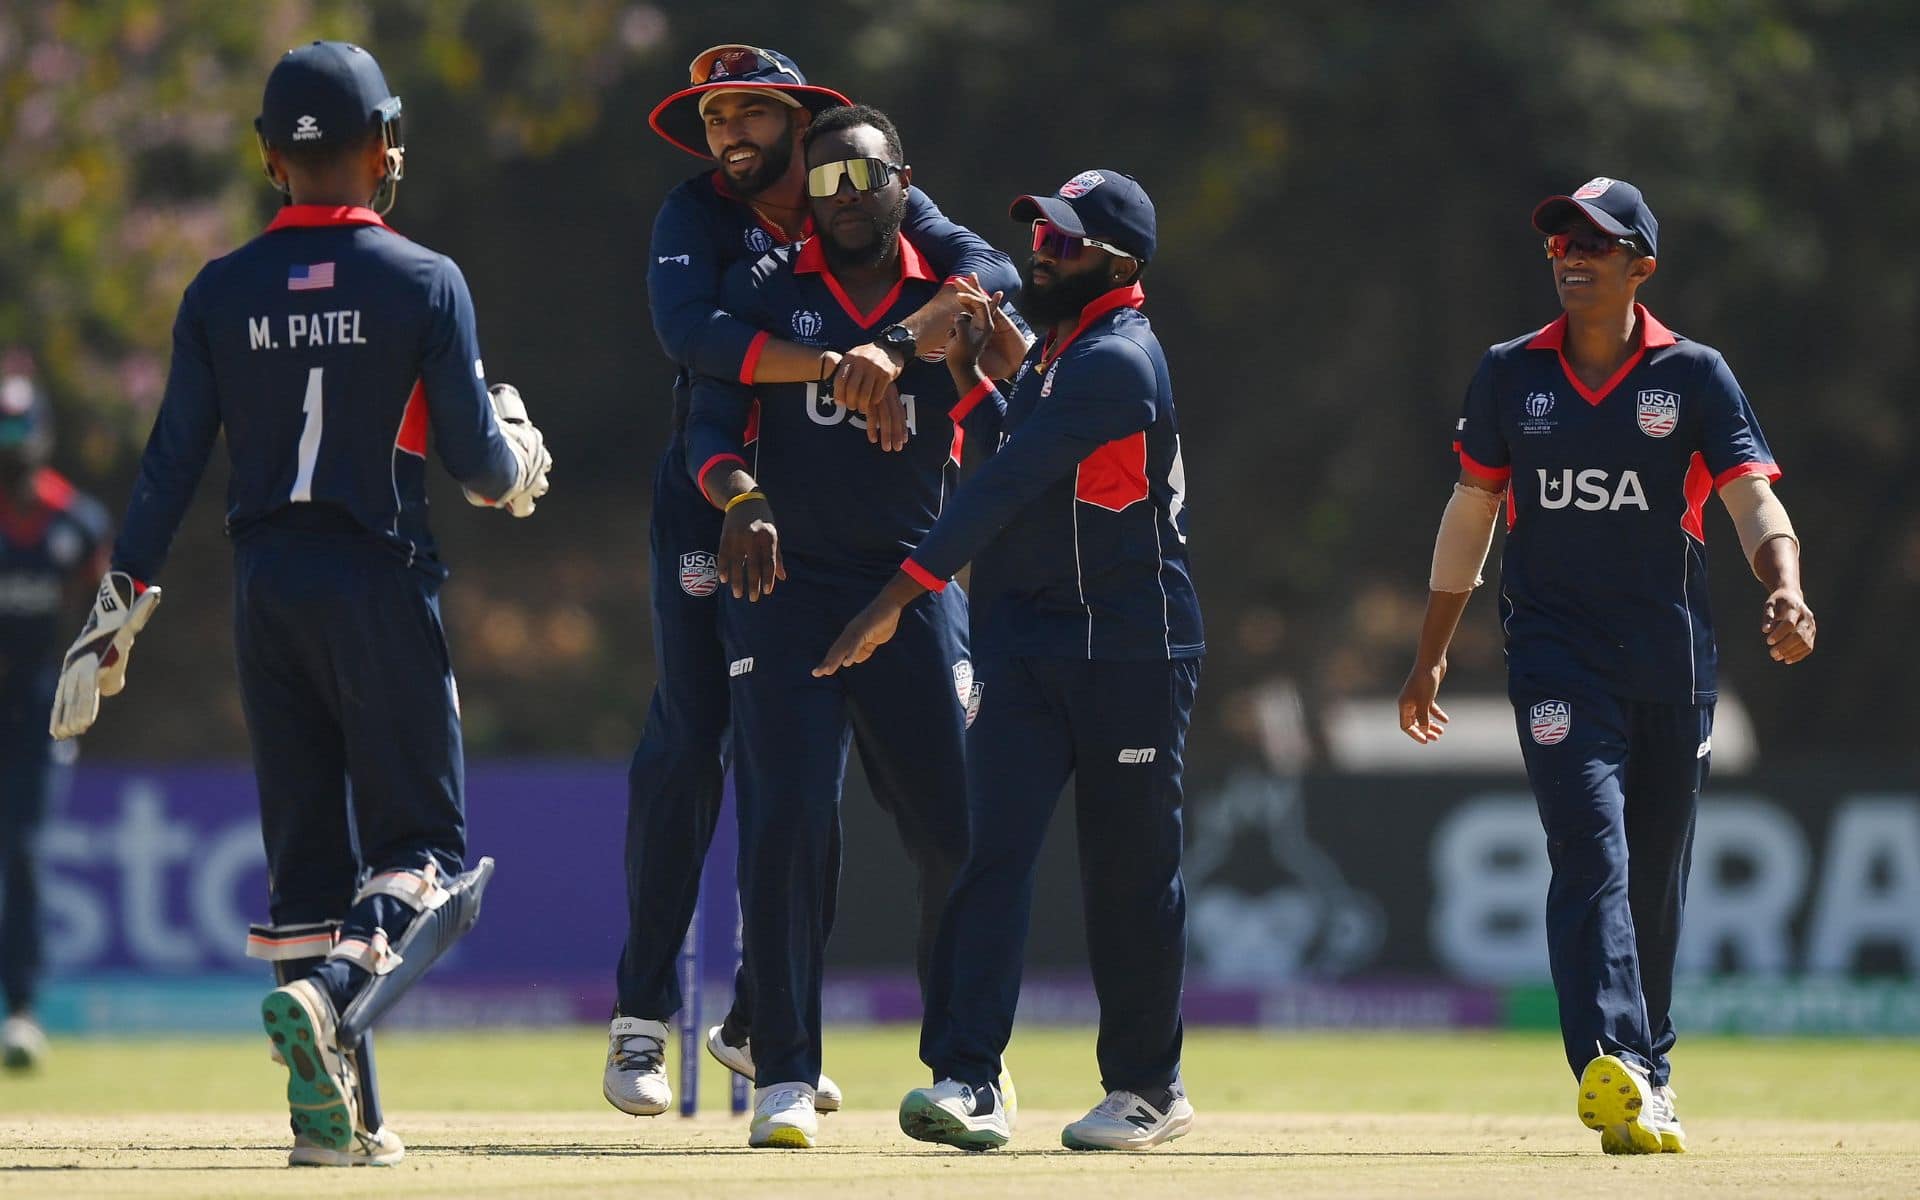 USA players celebrating a wicket in the first T20I (x.com)